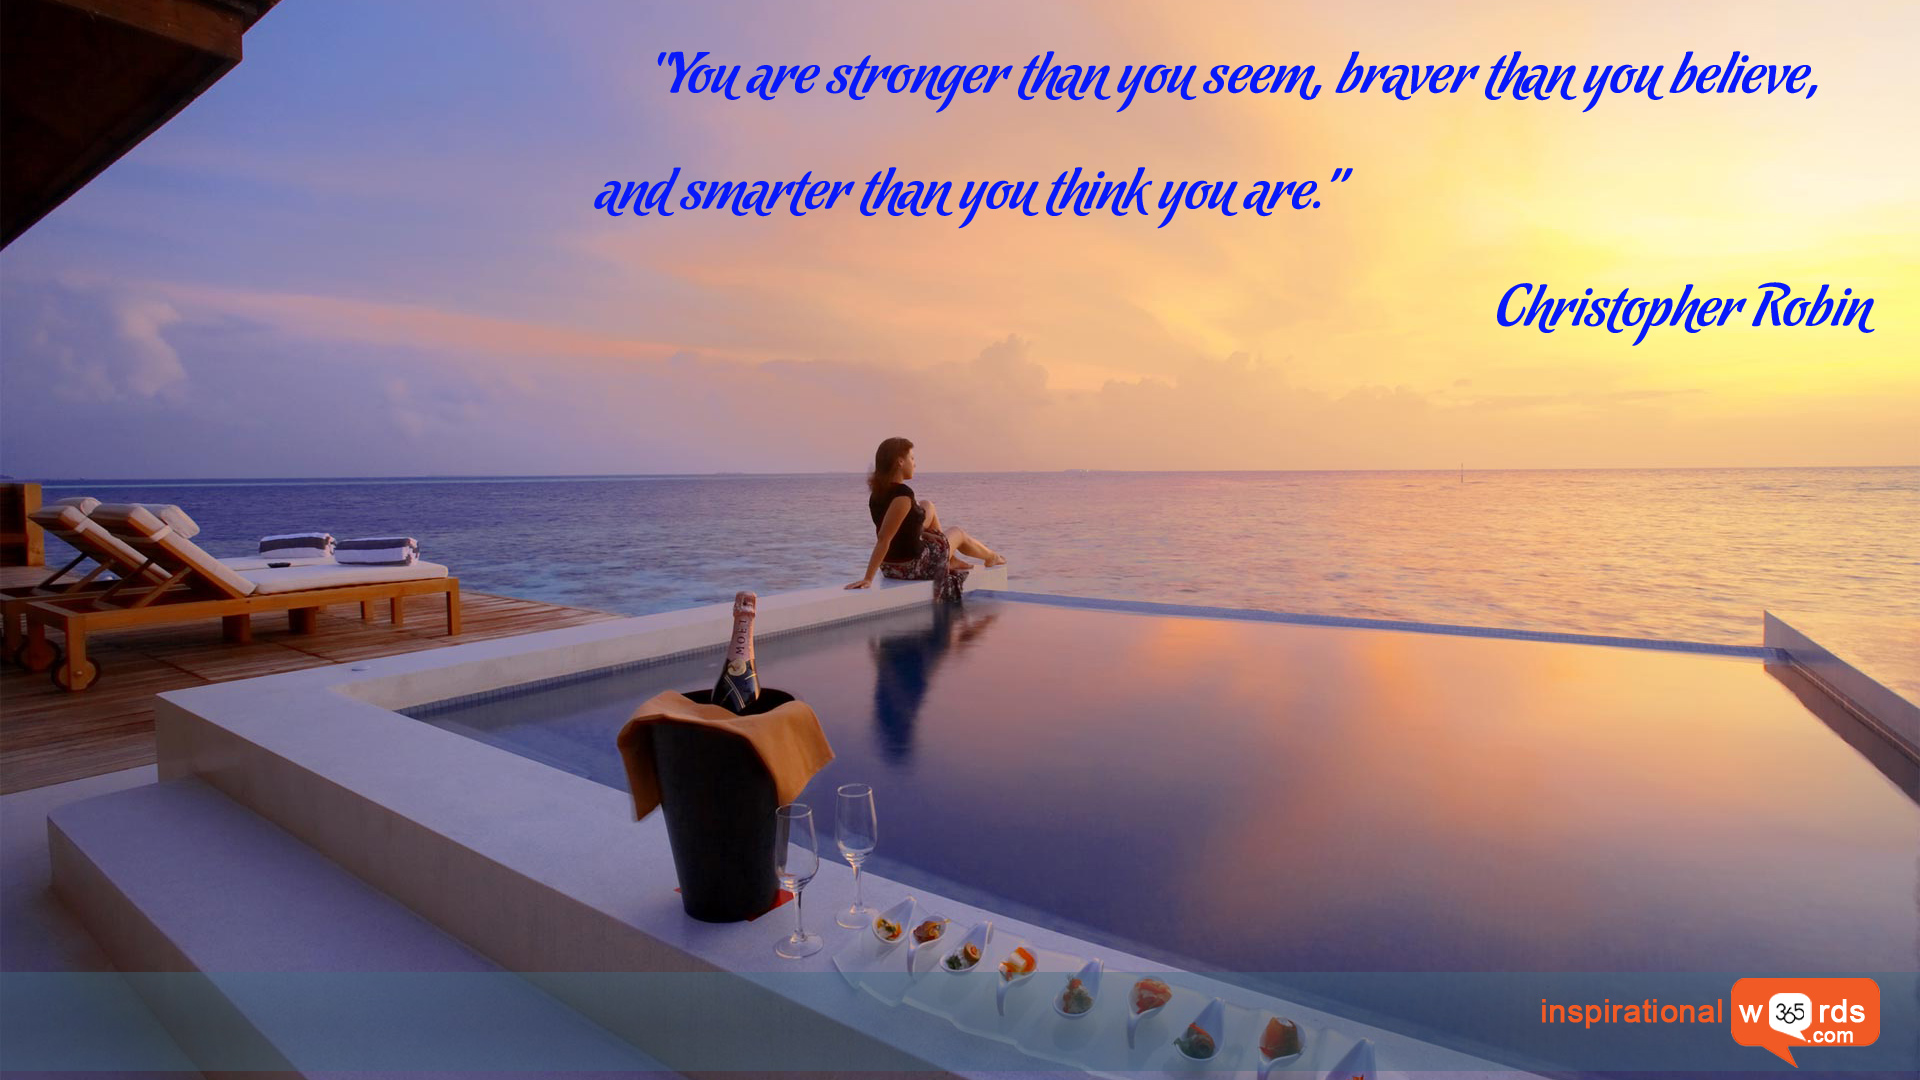 Inspirational Wallpaper Quote By Christopher Robin